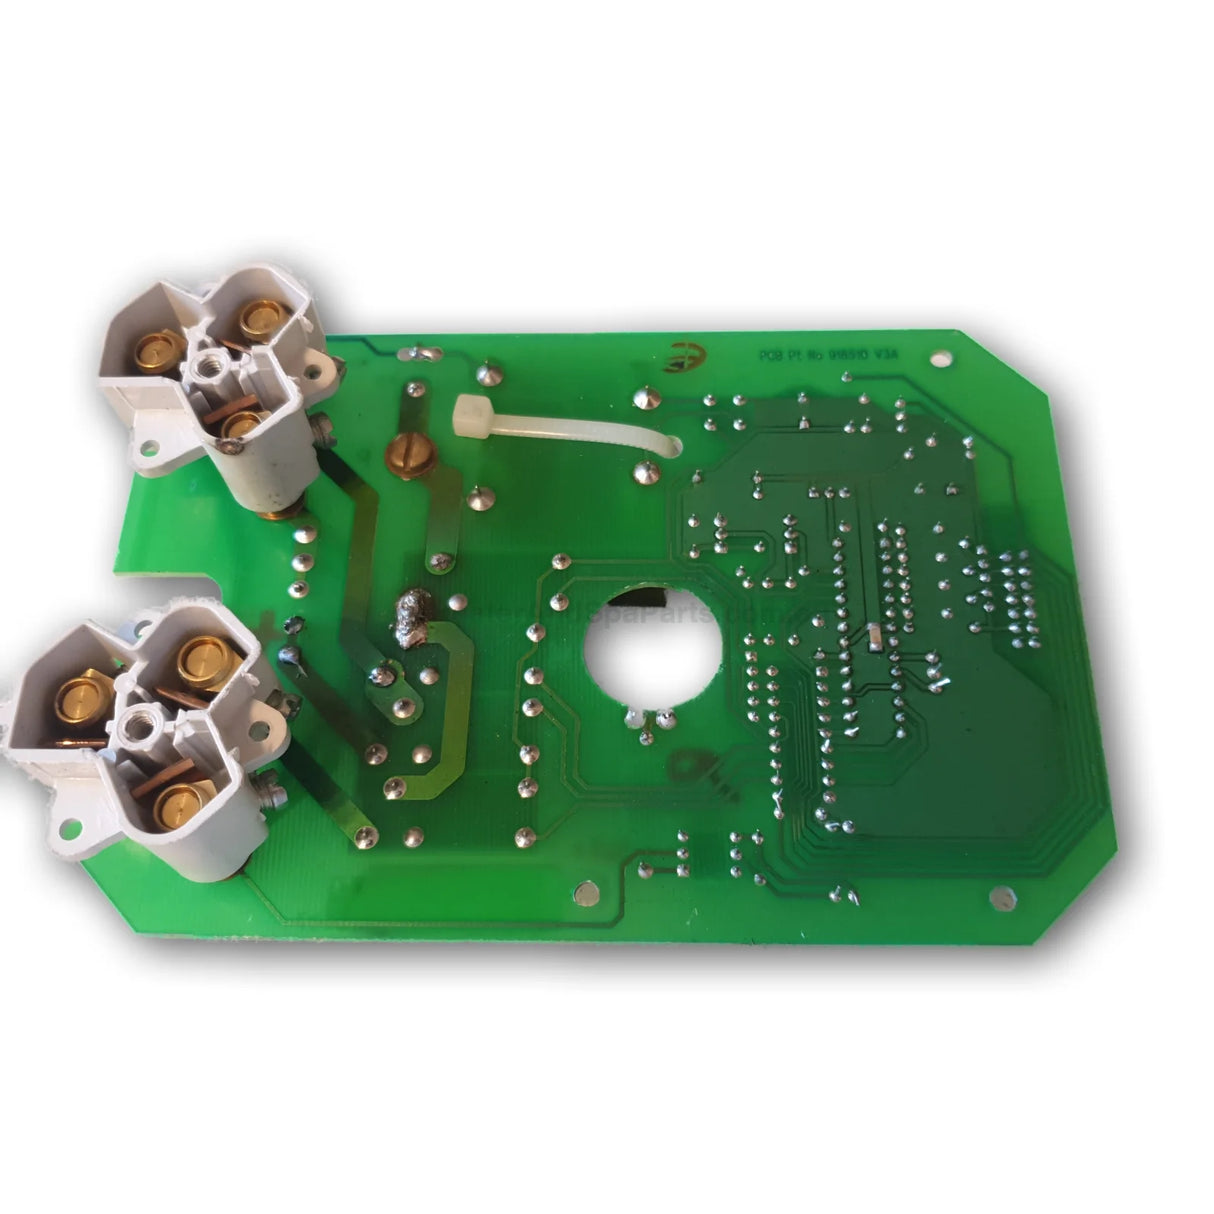 Davey SpaQuip Spa Power 500 54500 Circuit Board - SP500 MKII PCB - Heater and Spa Parts